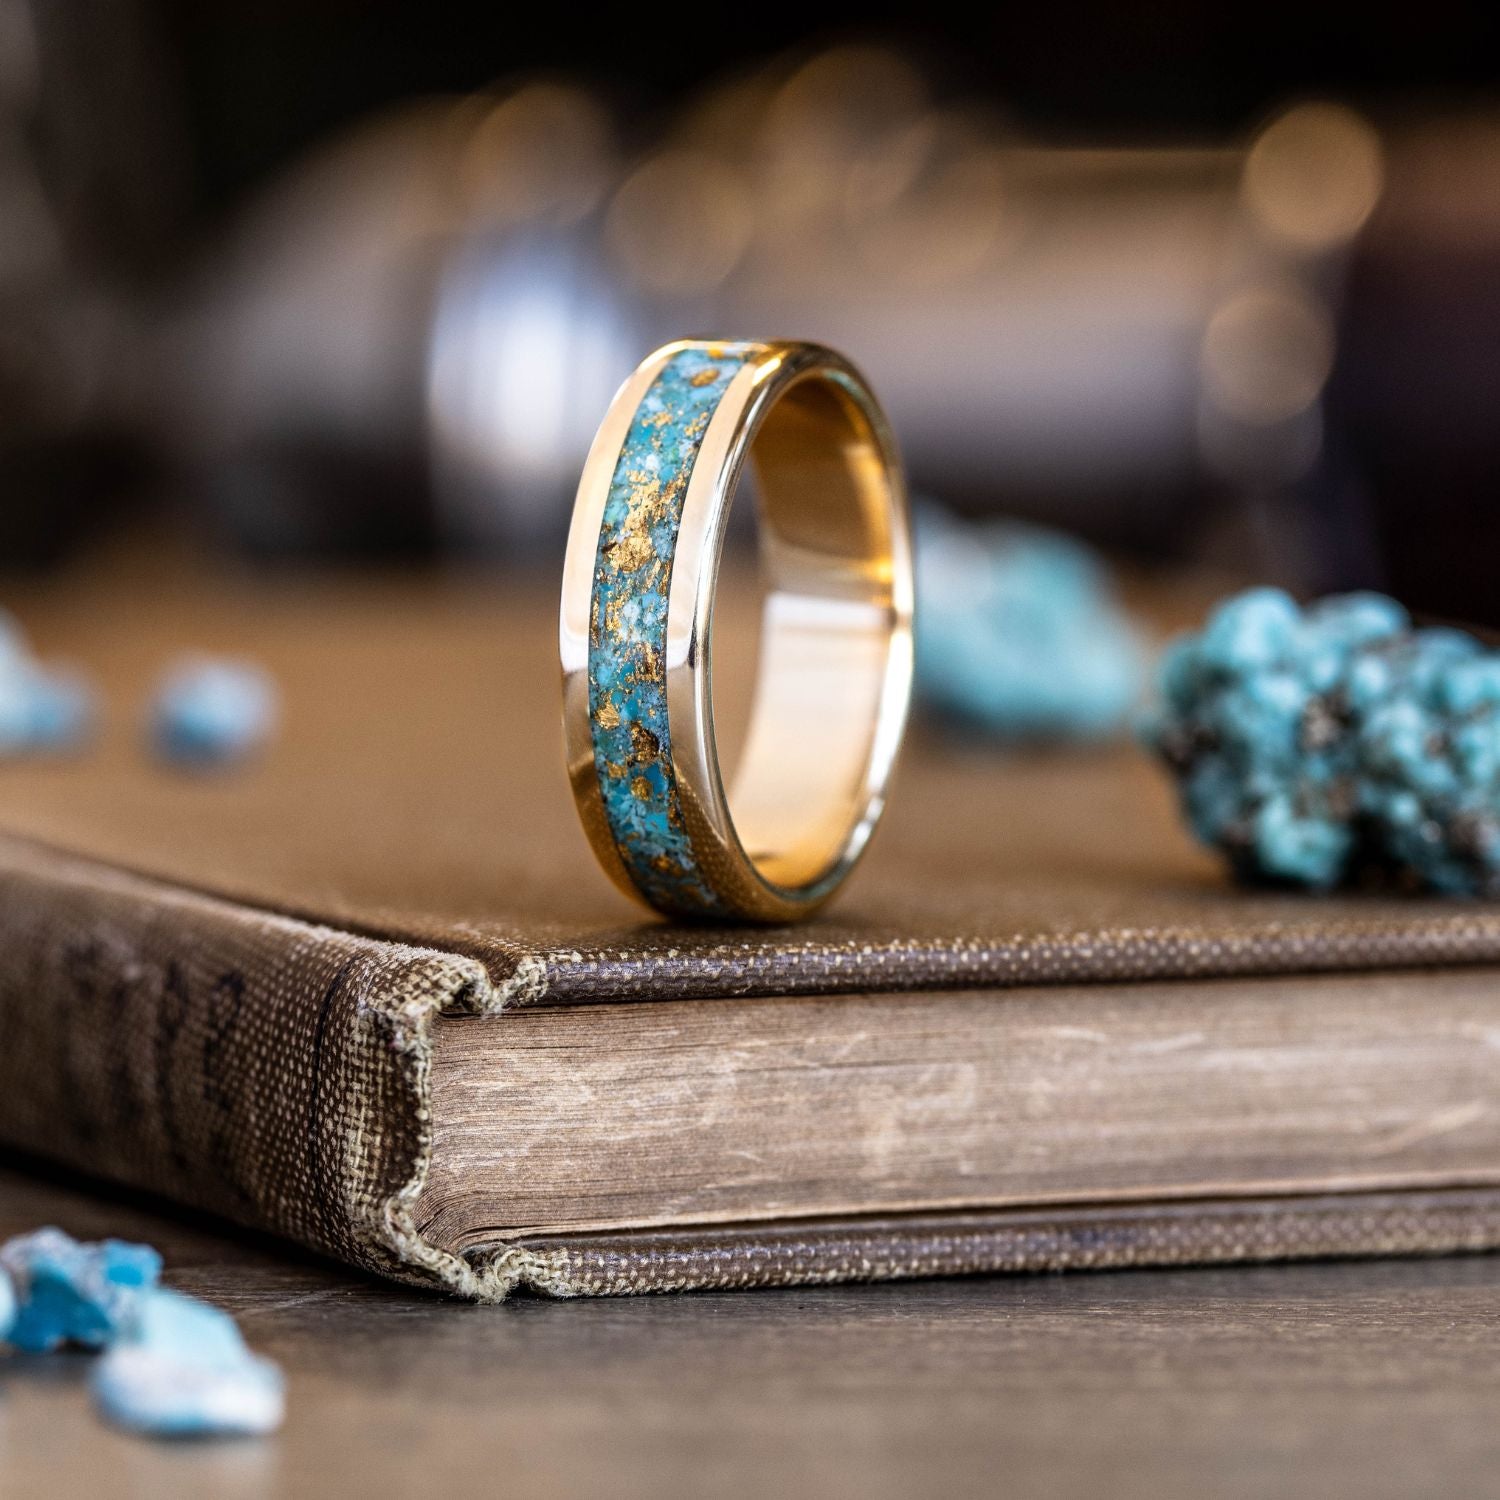 Sultan Ring with turquoise